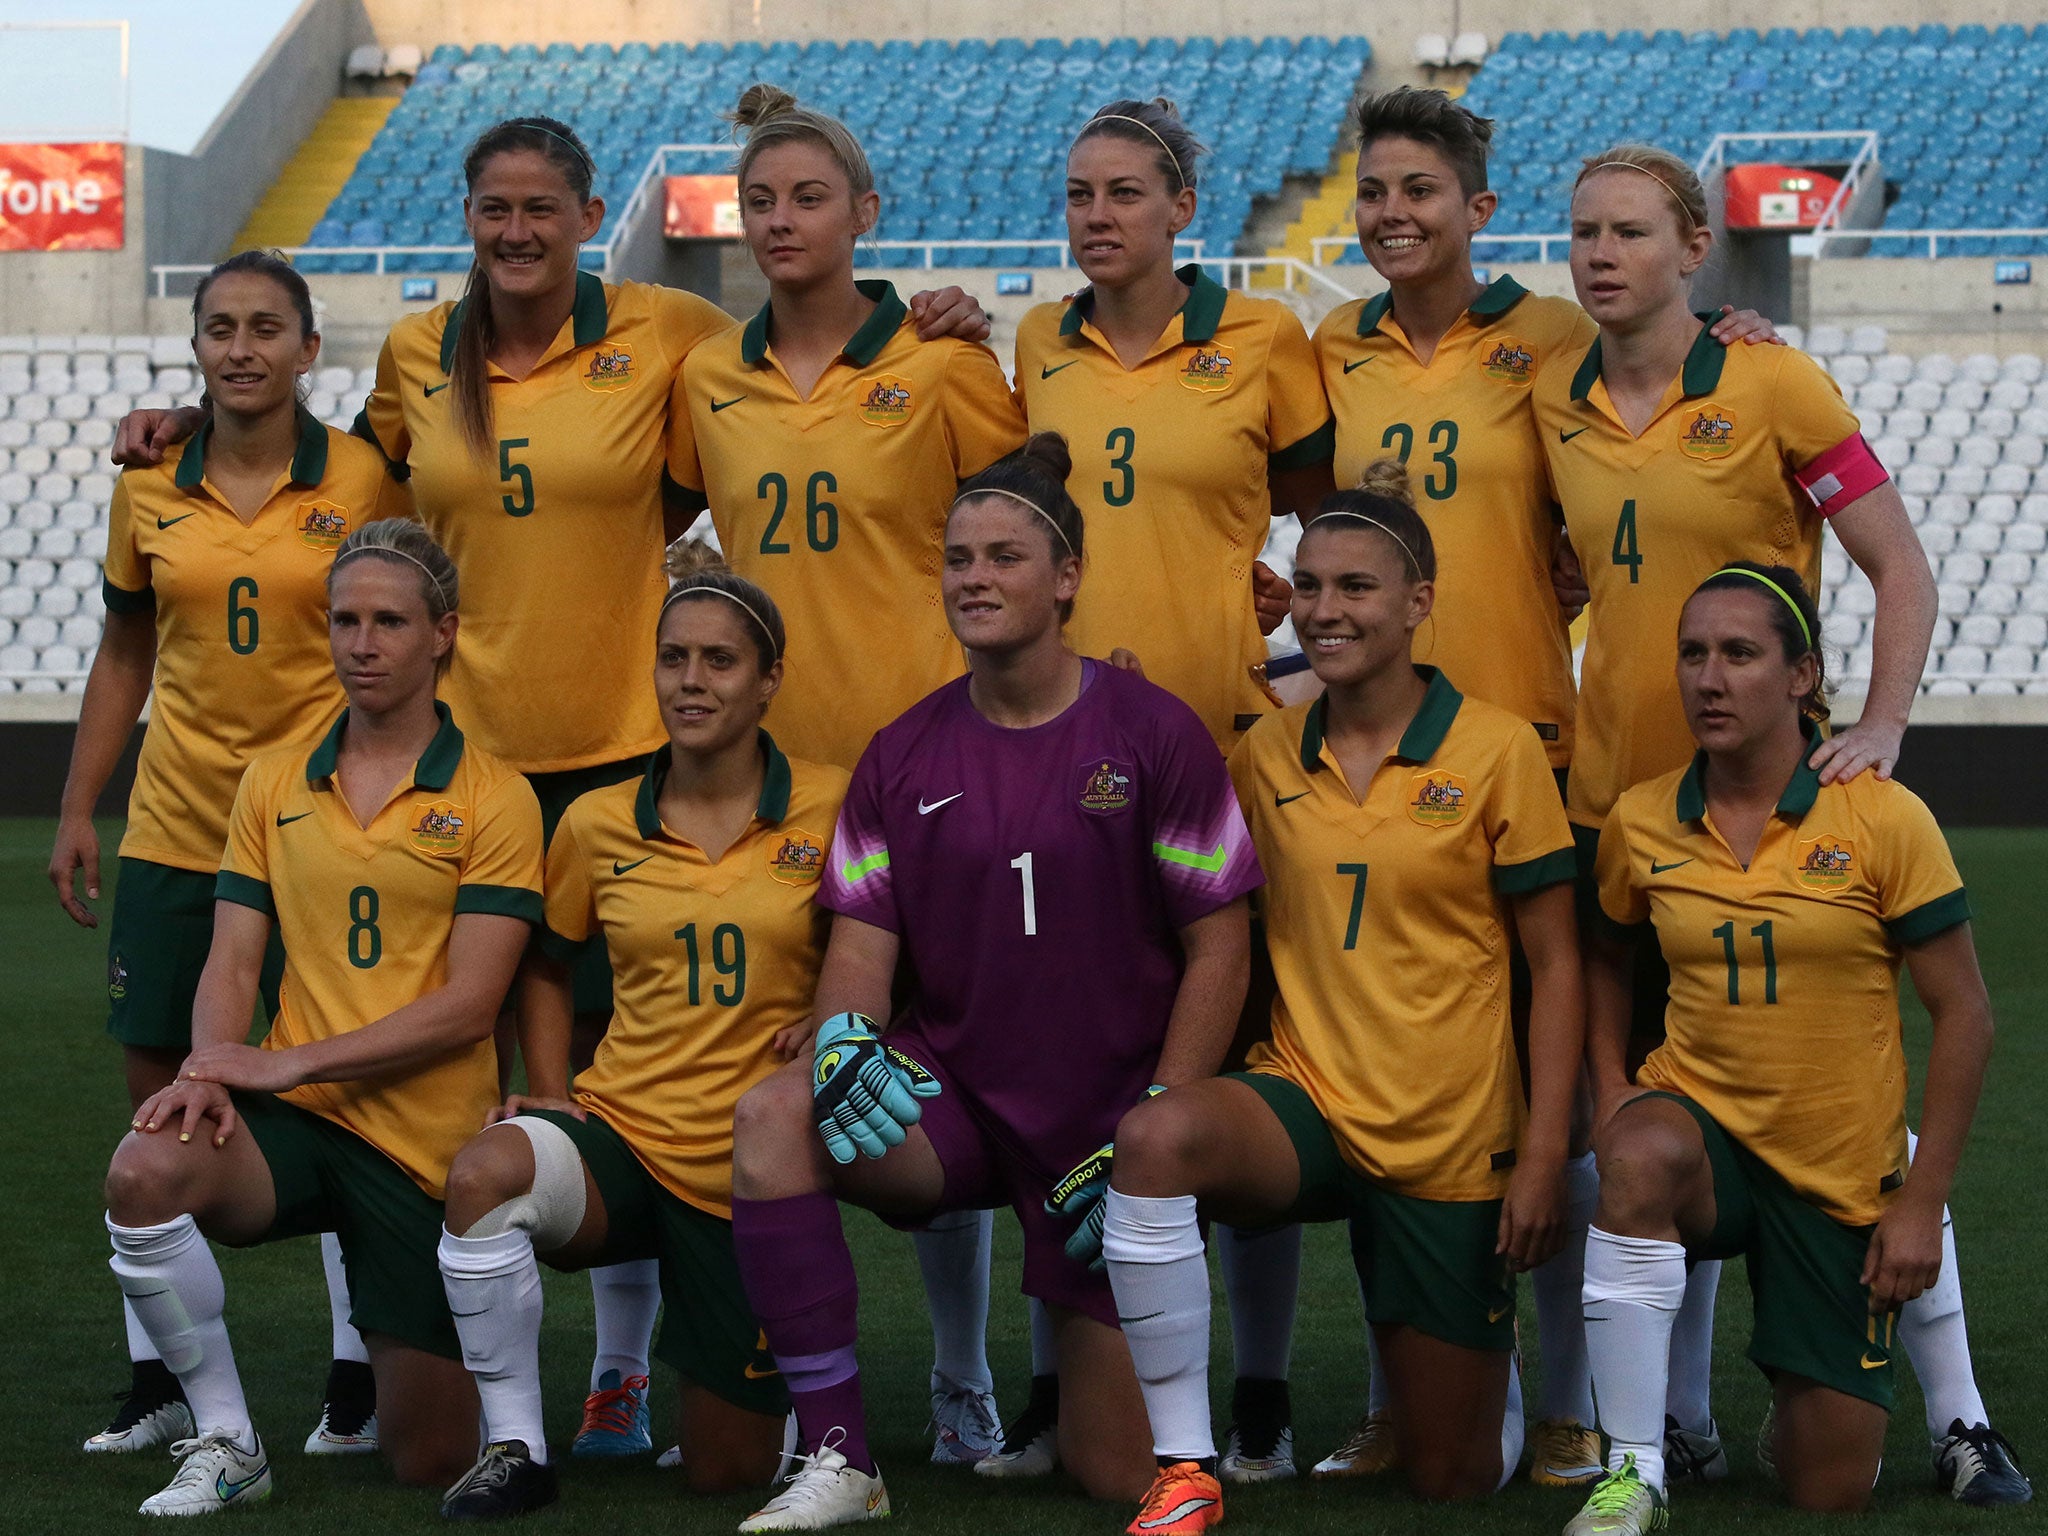 The Australian Women's team that took part in the match on Friday